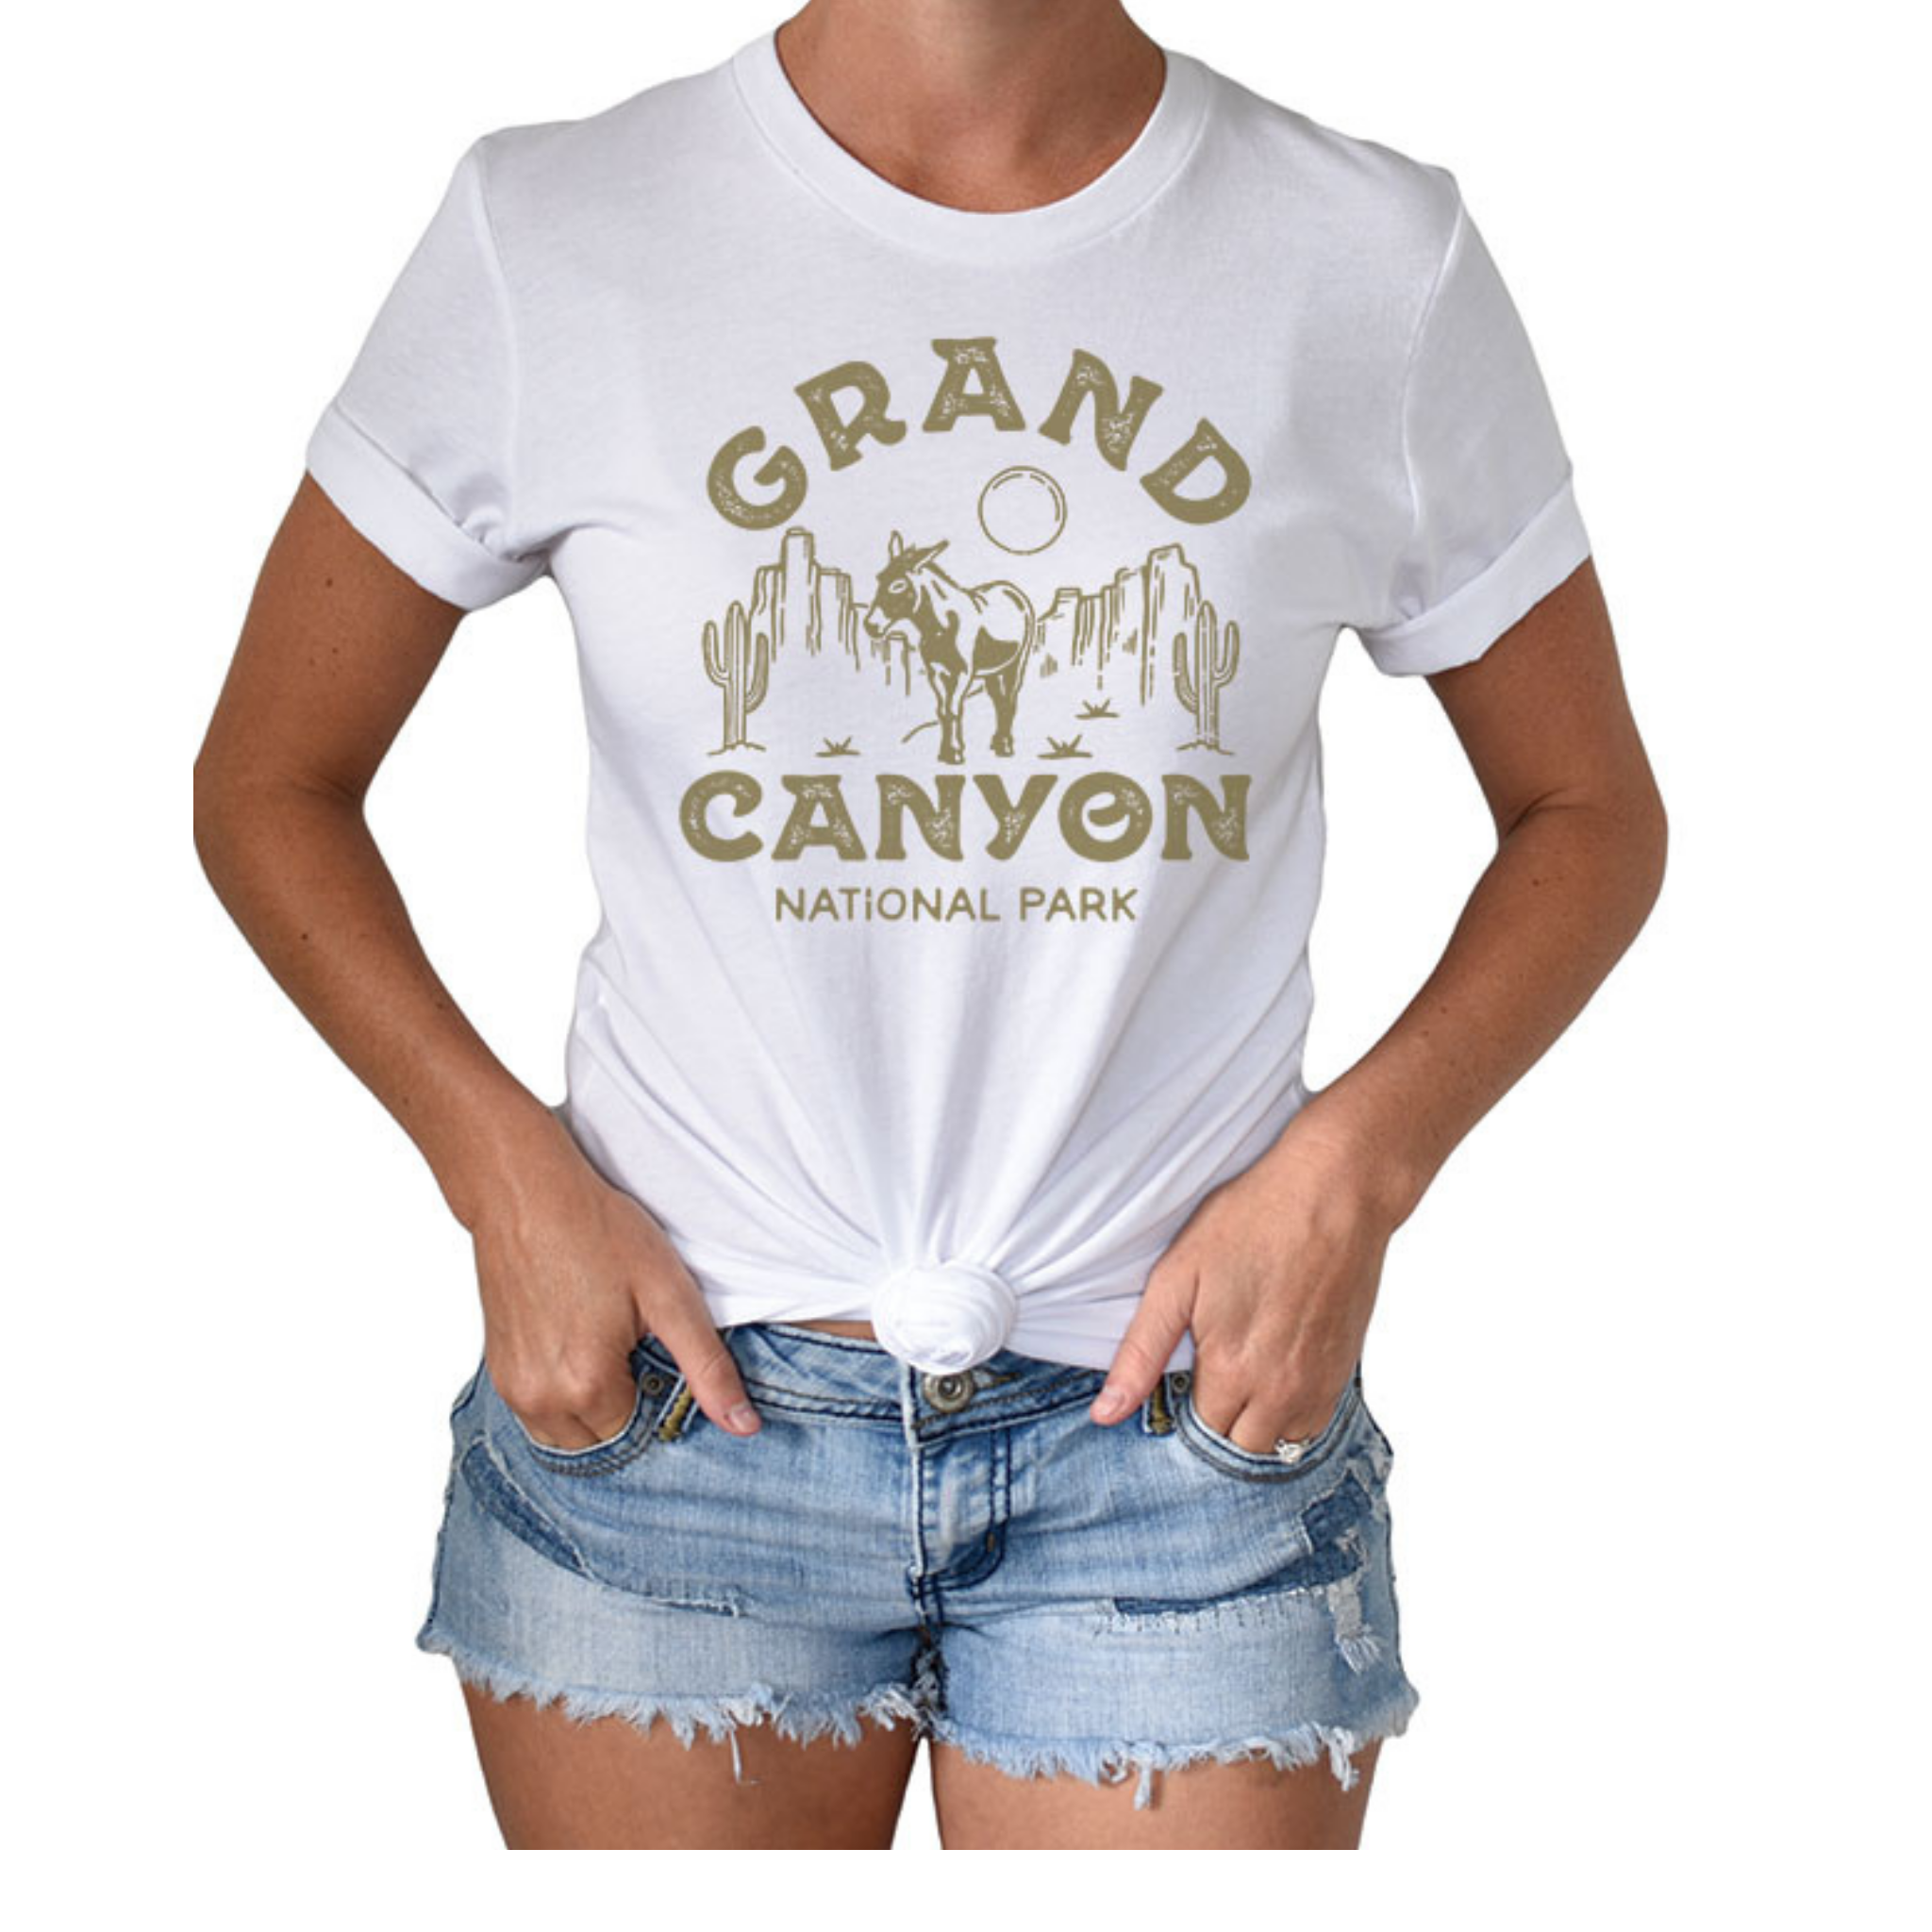 Woman wearing jean shorts and a short sleeved, crew neck t-shirt with a graphic that says "Grand Canyon National Park" around a canyon scene with cacti, a donkey, and a circle sun/moon.